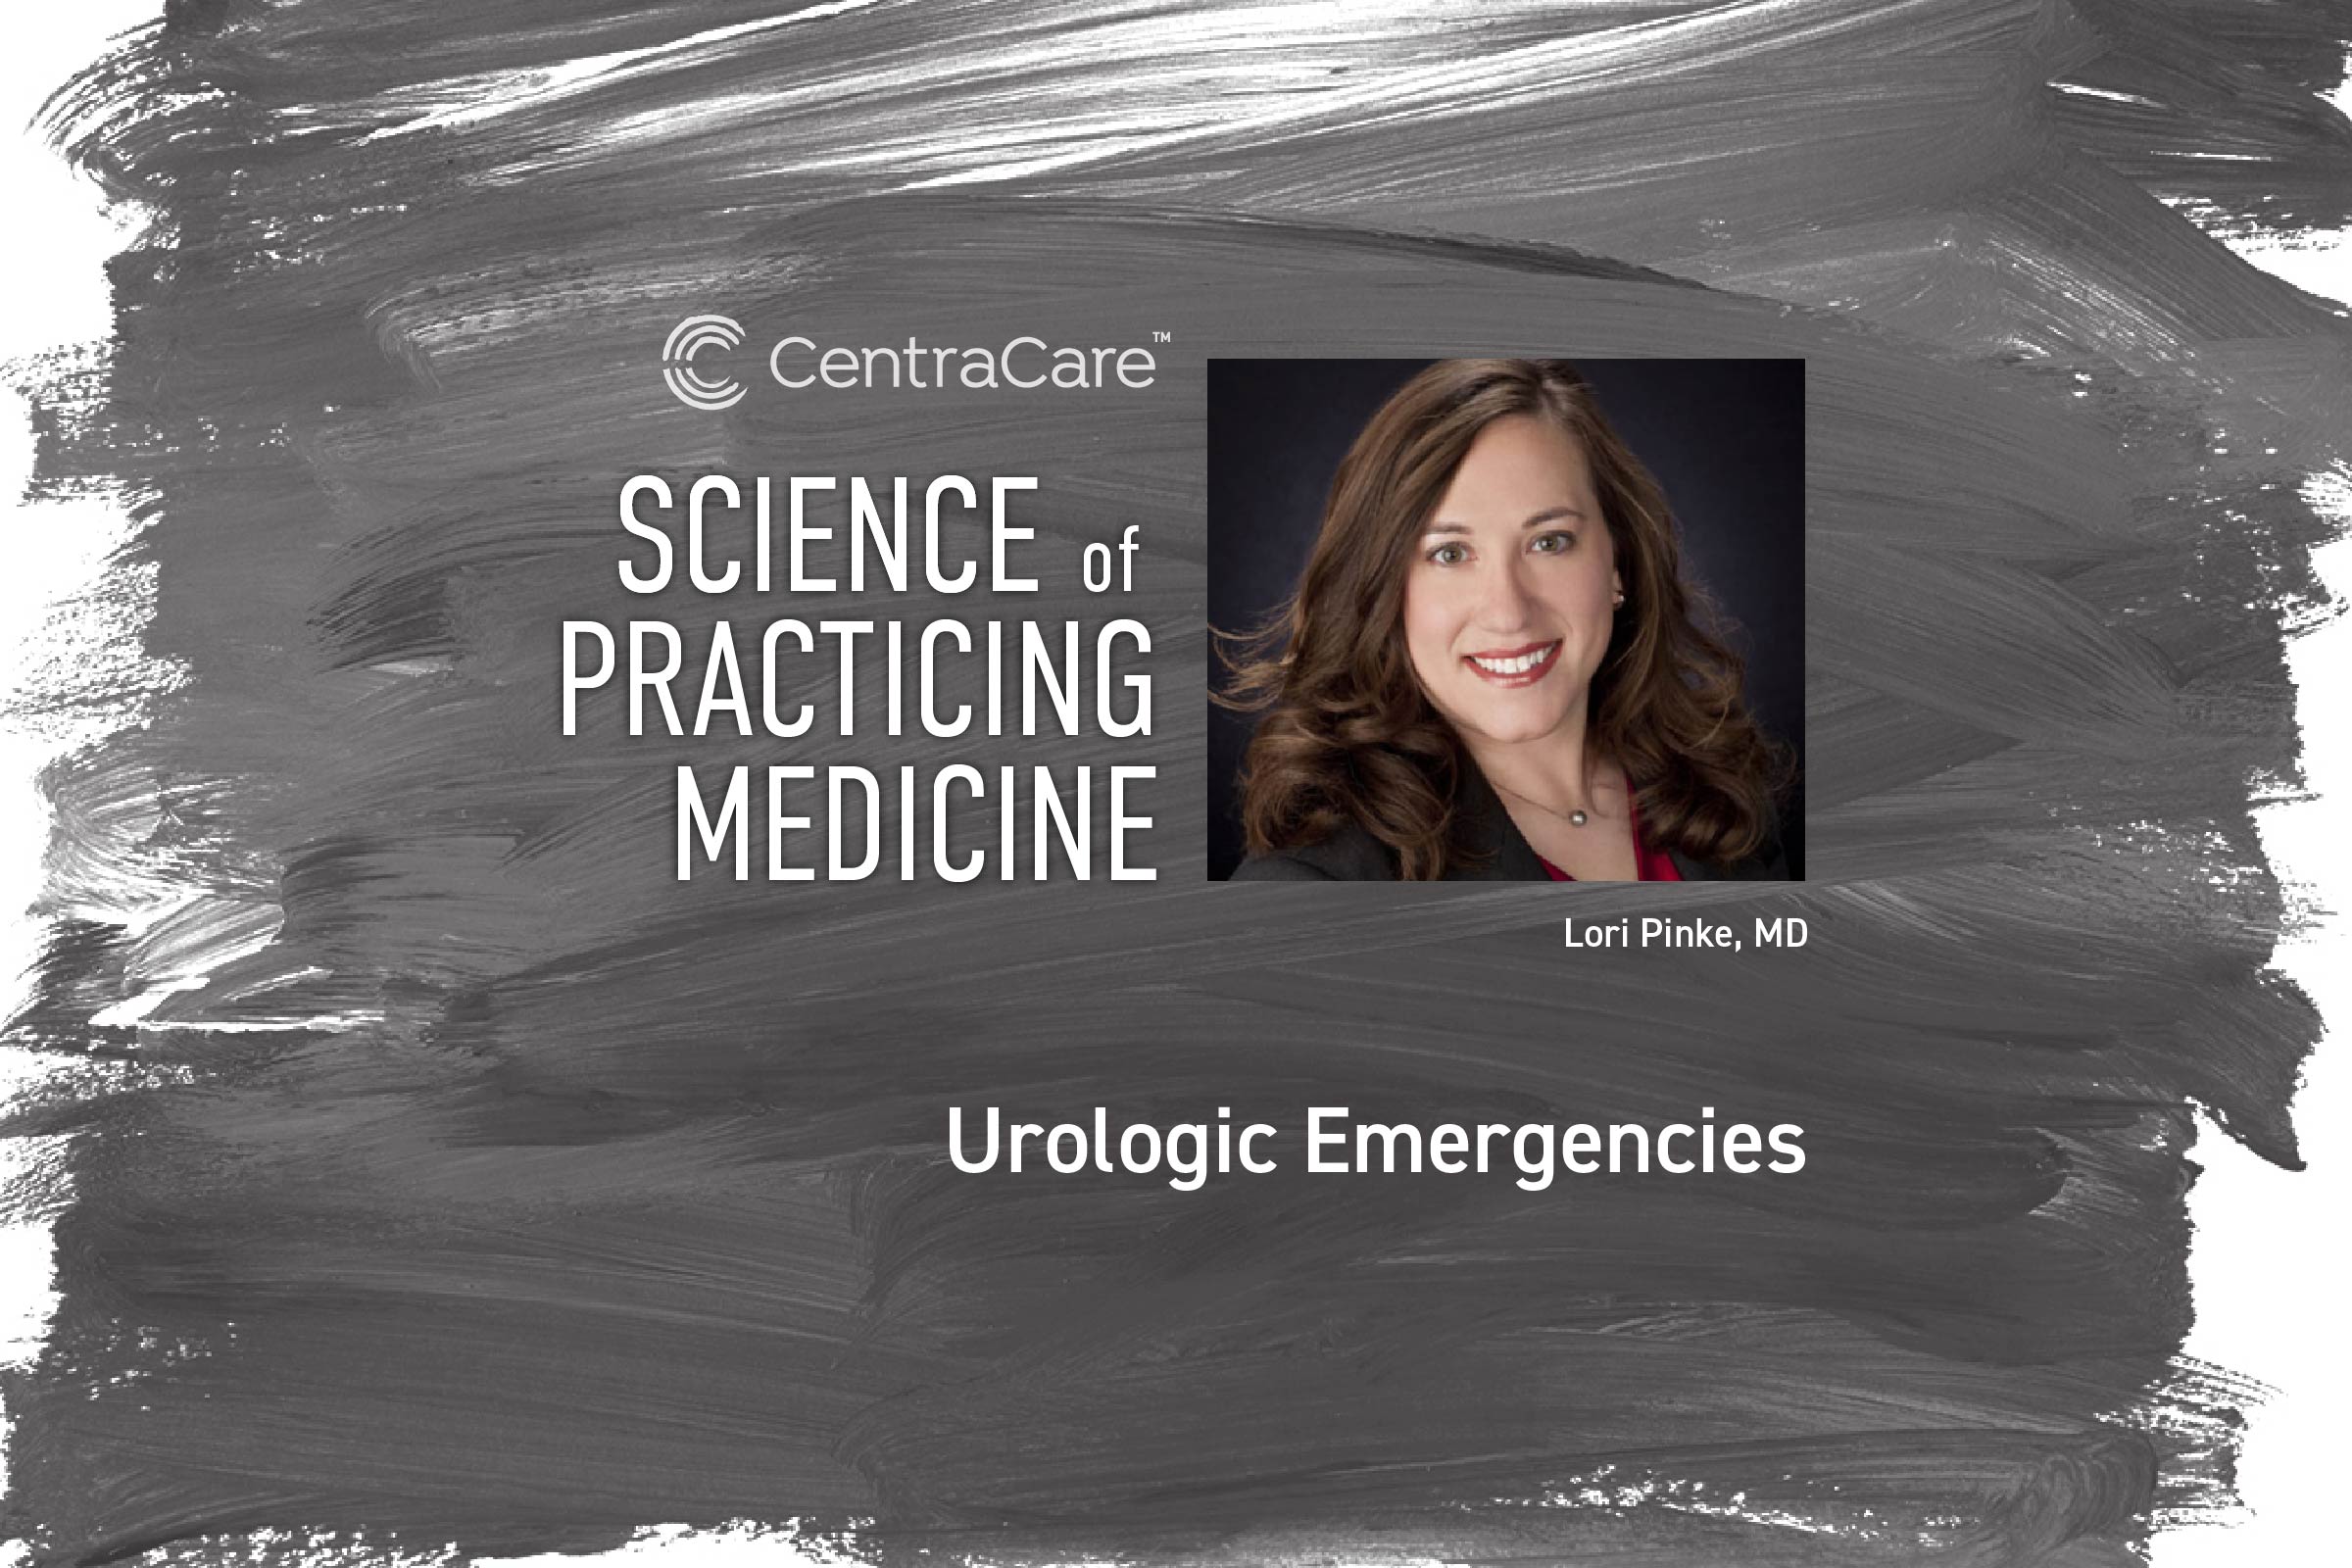 Digital promotion for the CME Science of Practicing Medicine session on Urologic Emergencies with Dr. Lori Pinke